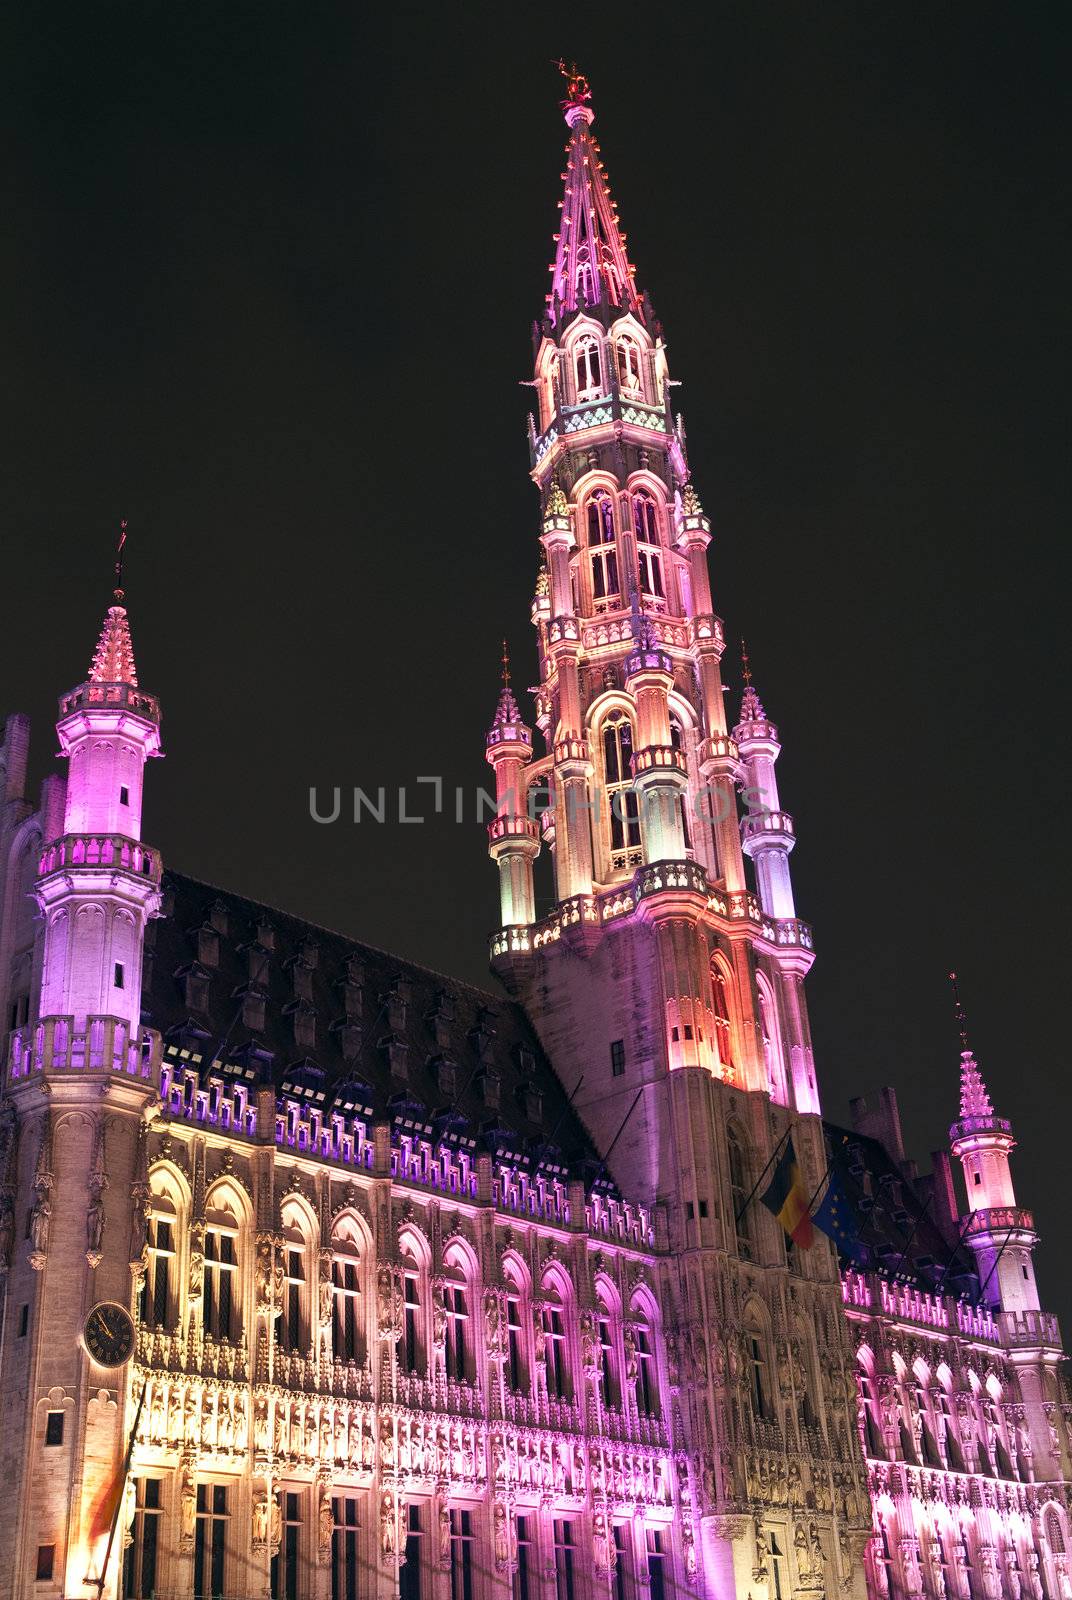 Brussels City Hall (Hotel de Ville) in Grand Place by chrisdorney